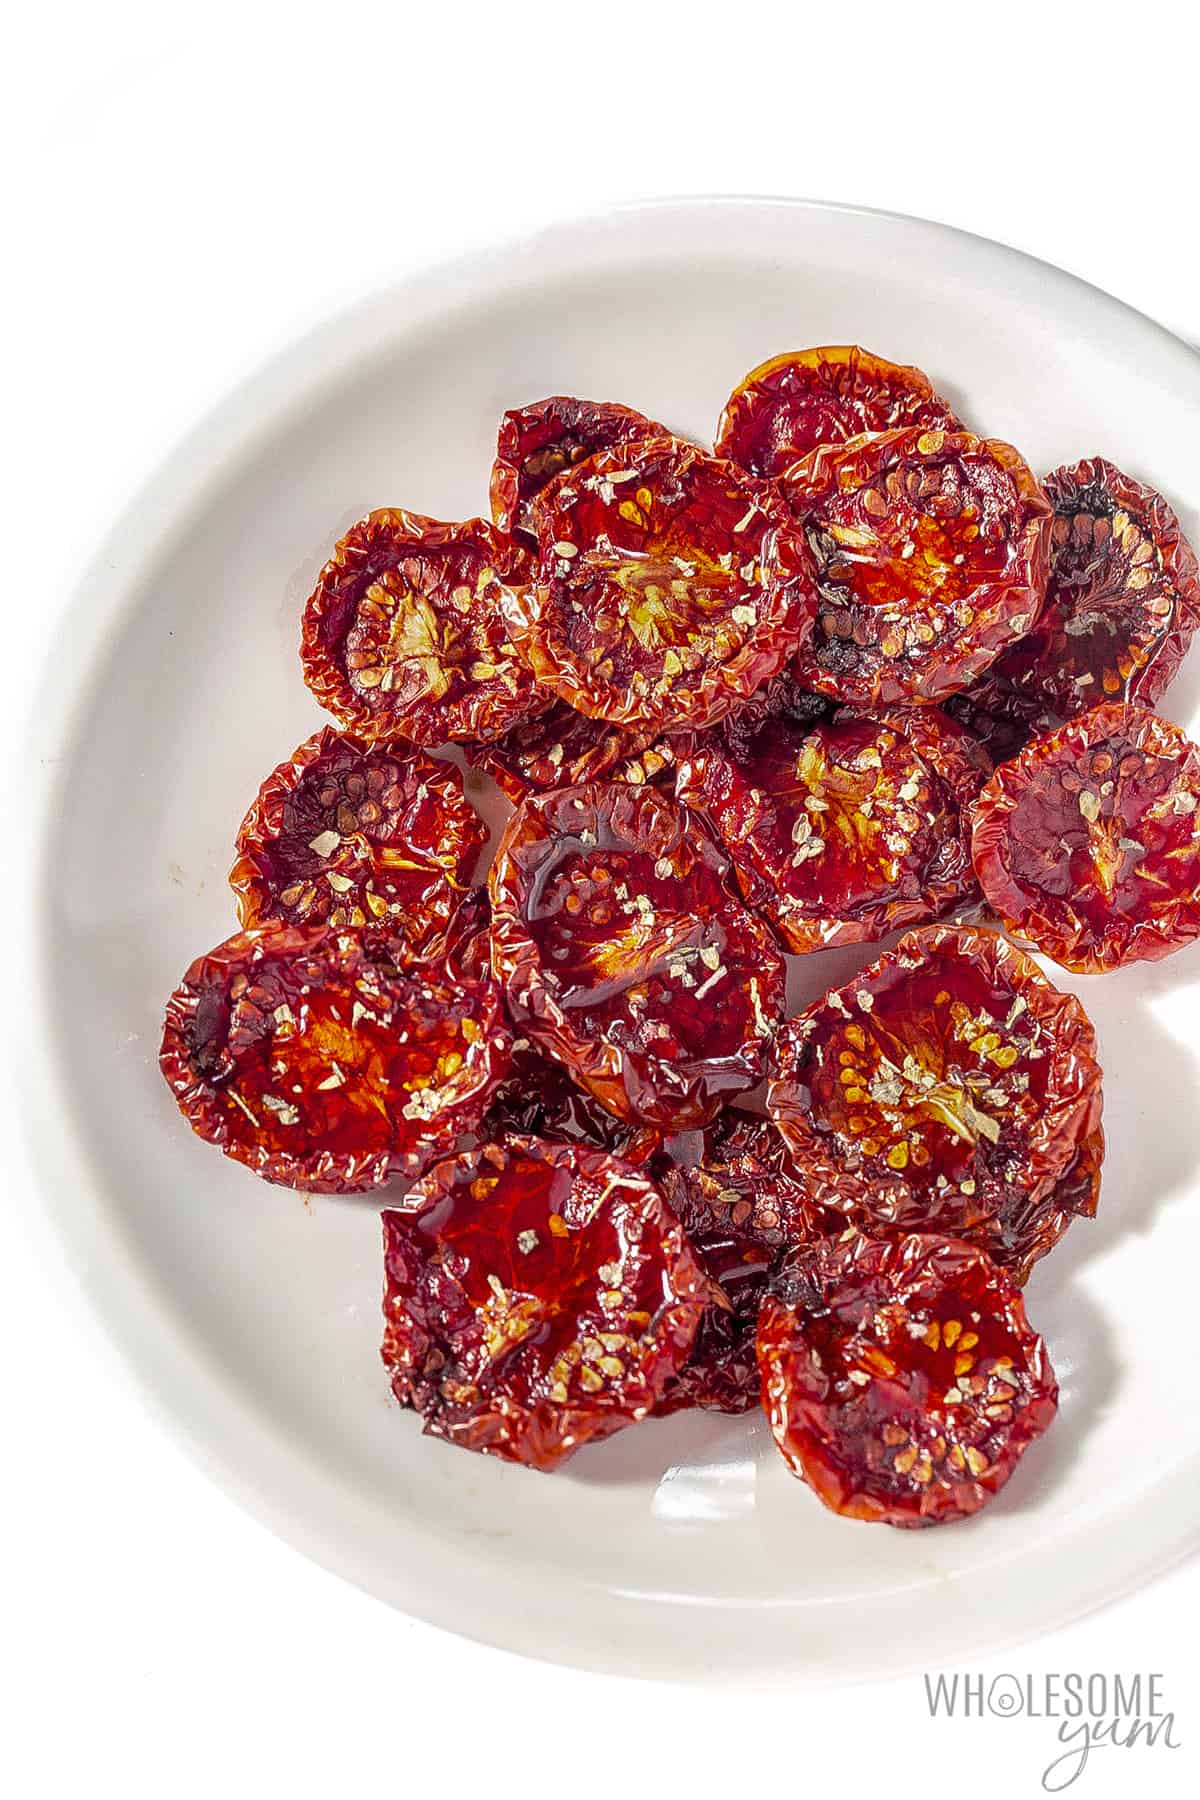 Oven dried tomatoes on a plate.